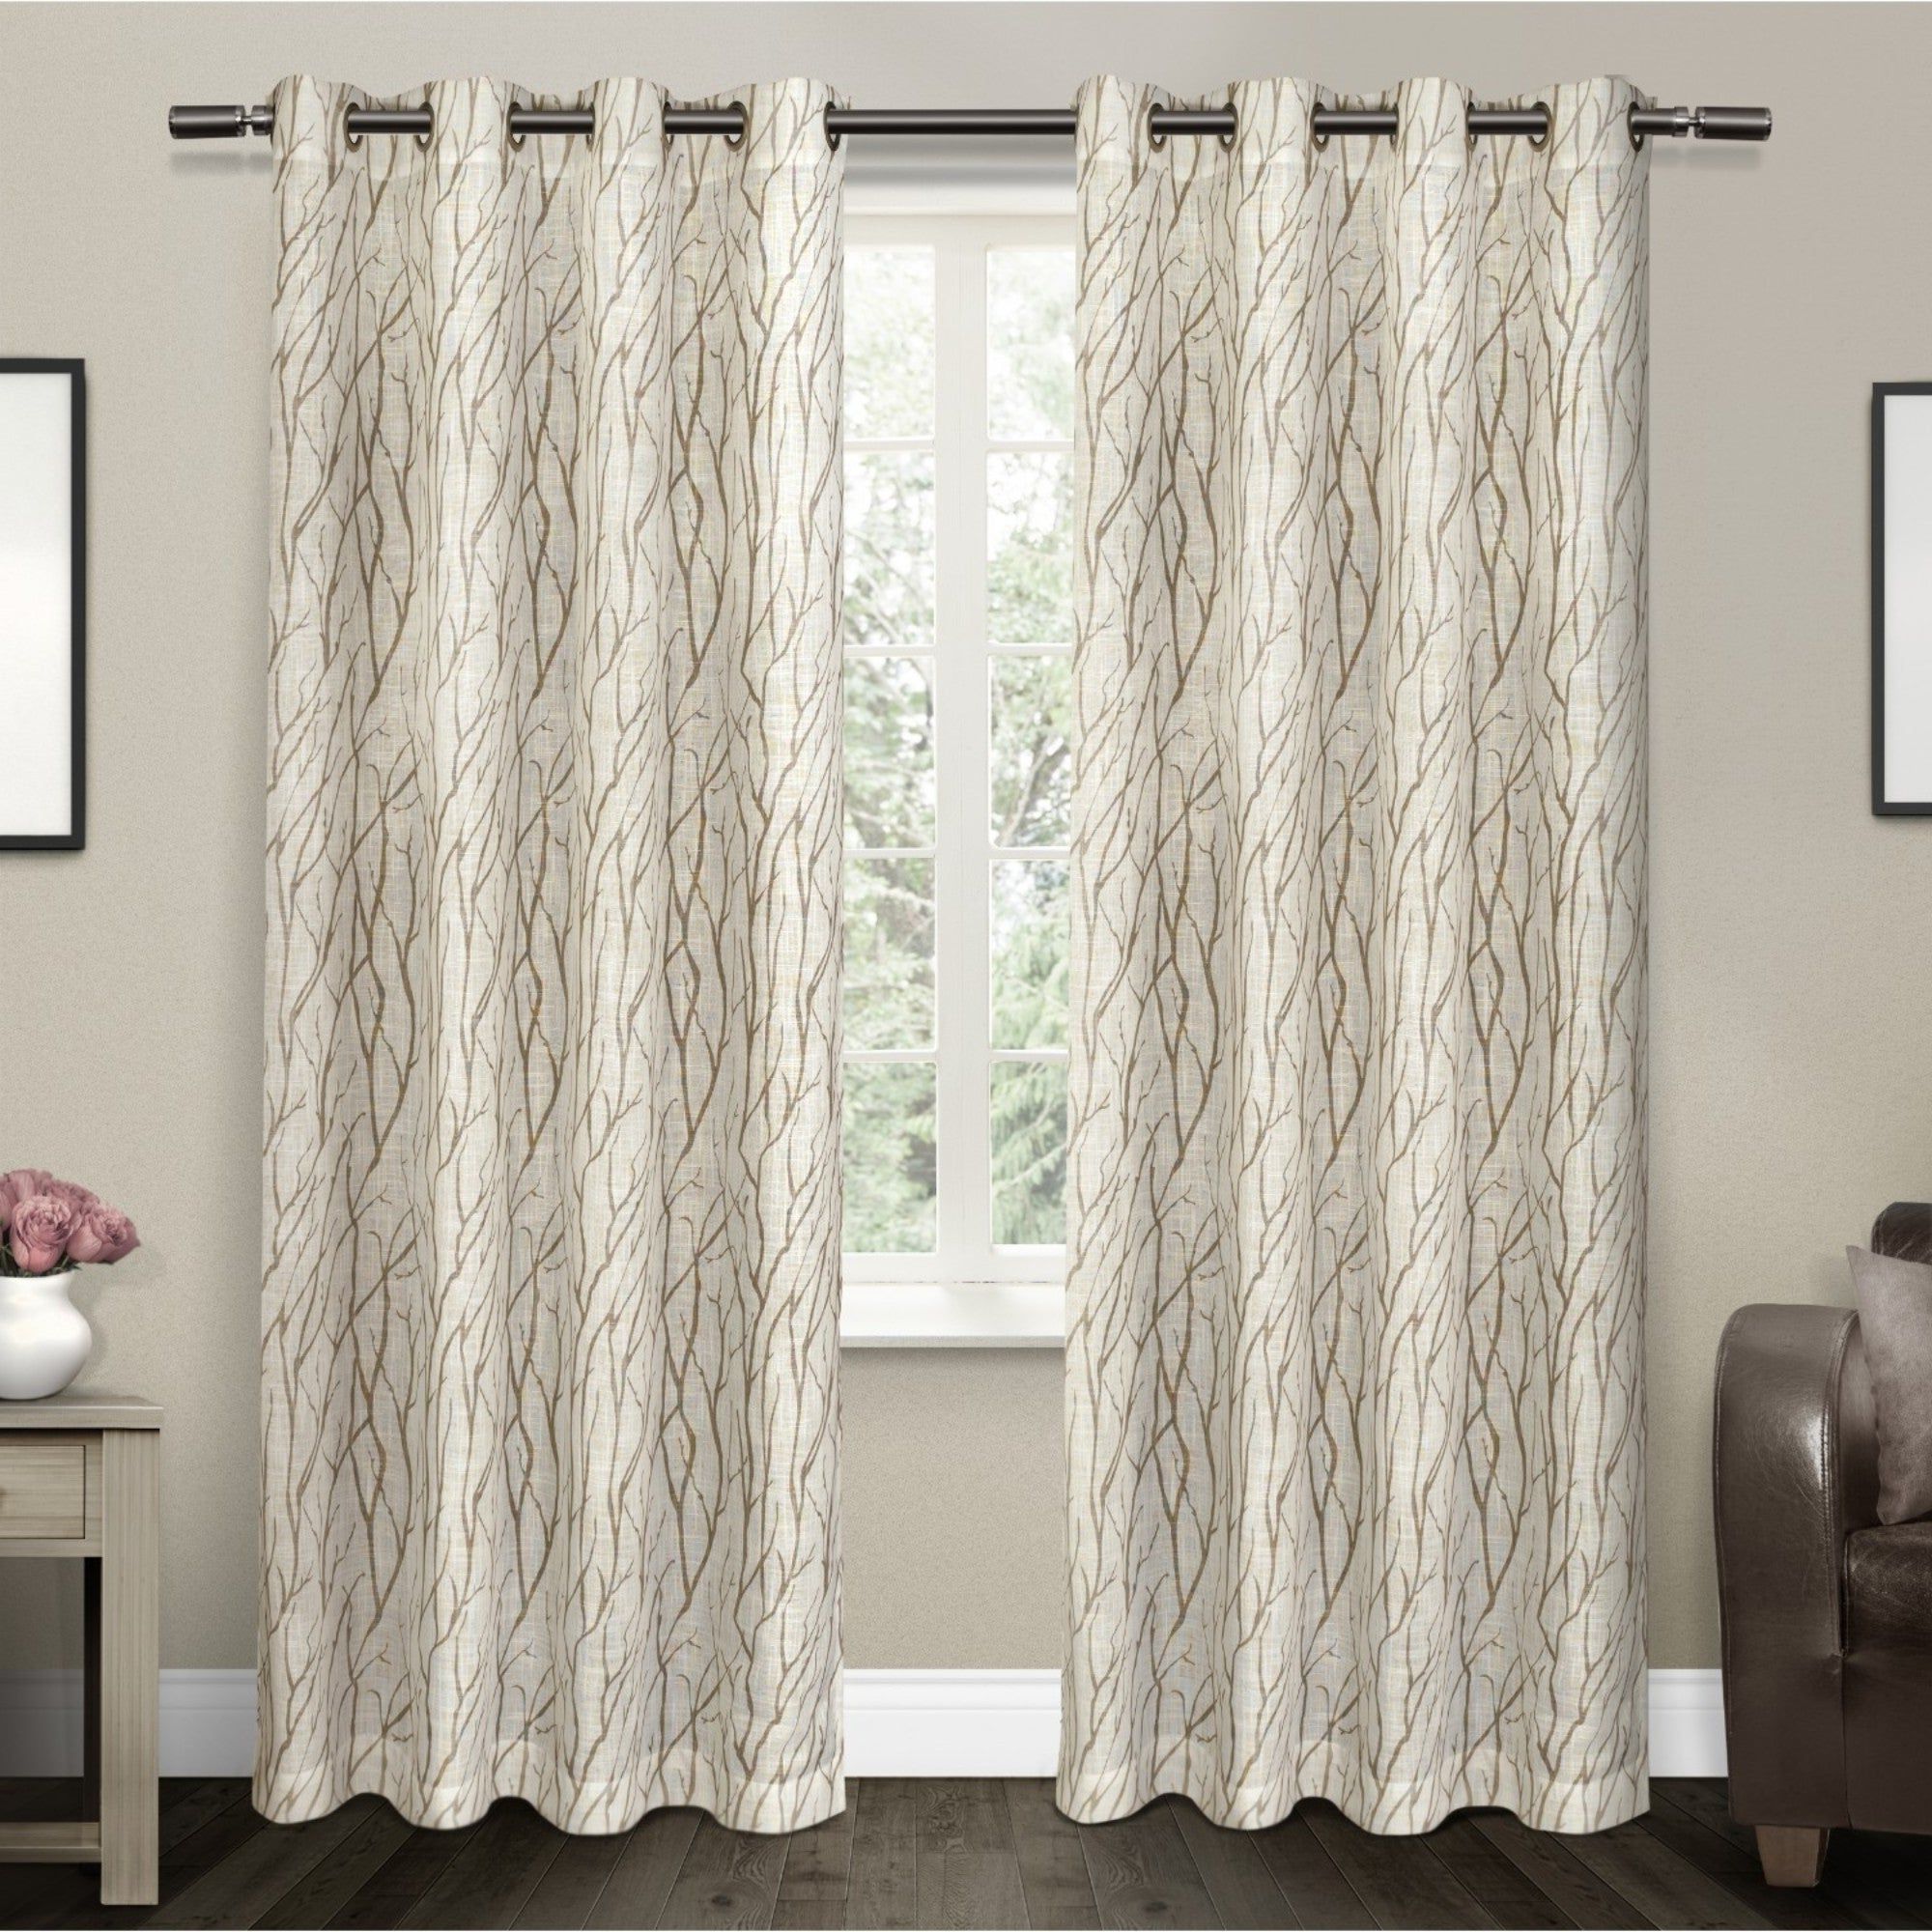 Ati Home Oakdale Textured Linen Sheer Grommet Top Curtain Panel Pair Within Trendy Oakdale Textured Linen Sheer Grommet Top Curtain Panel Pairs (View 1 of 20)